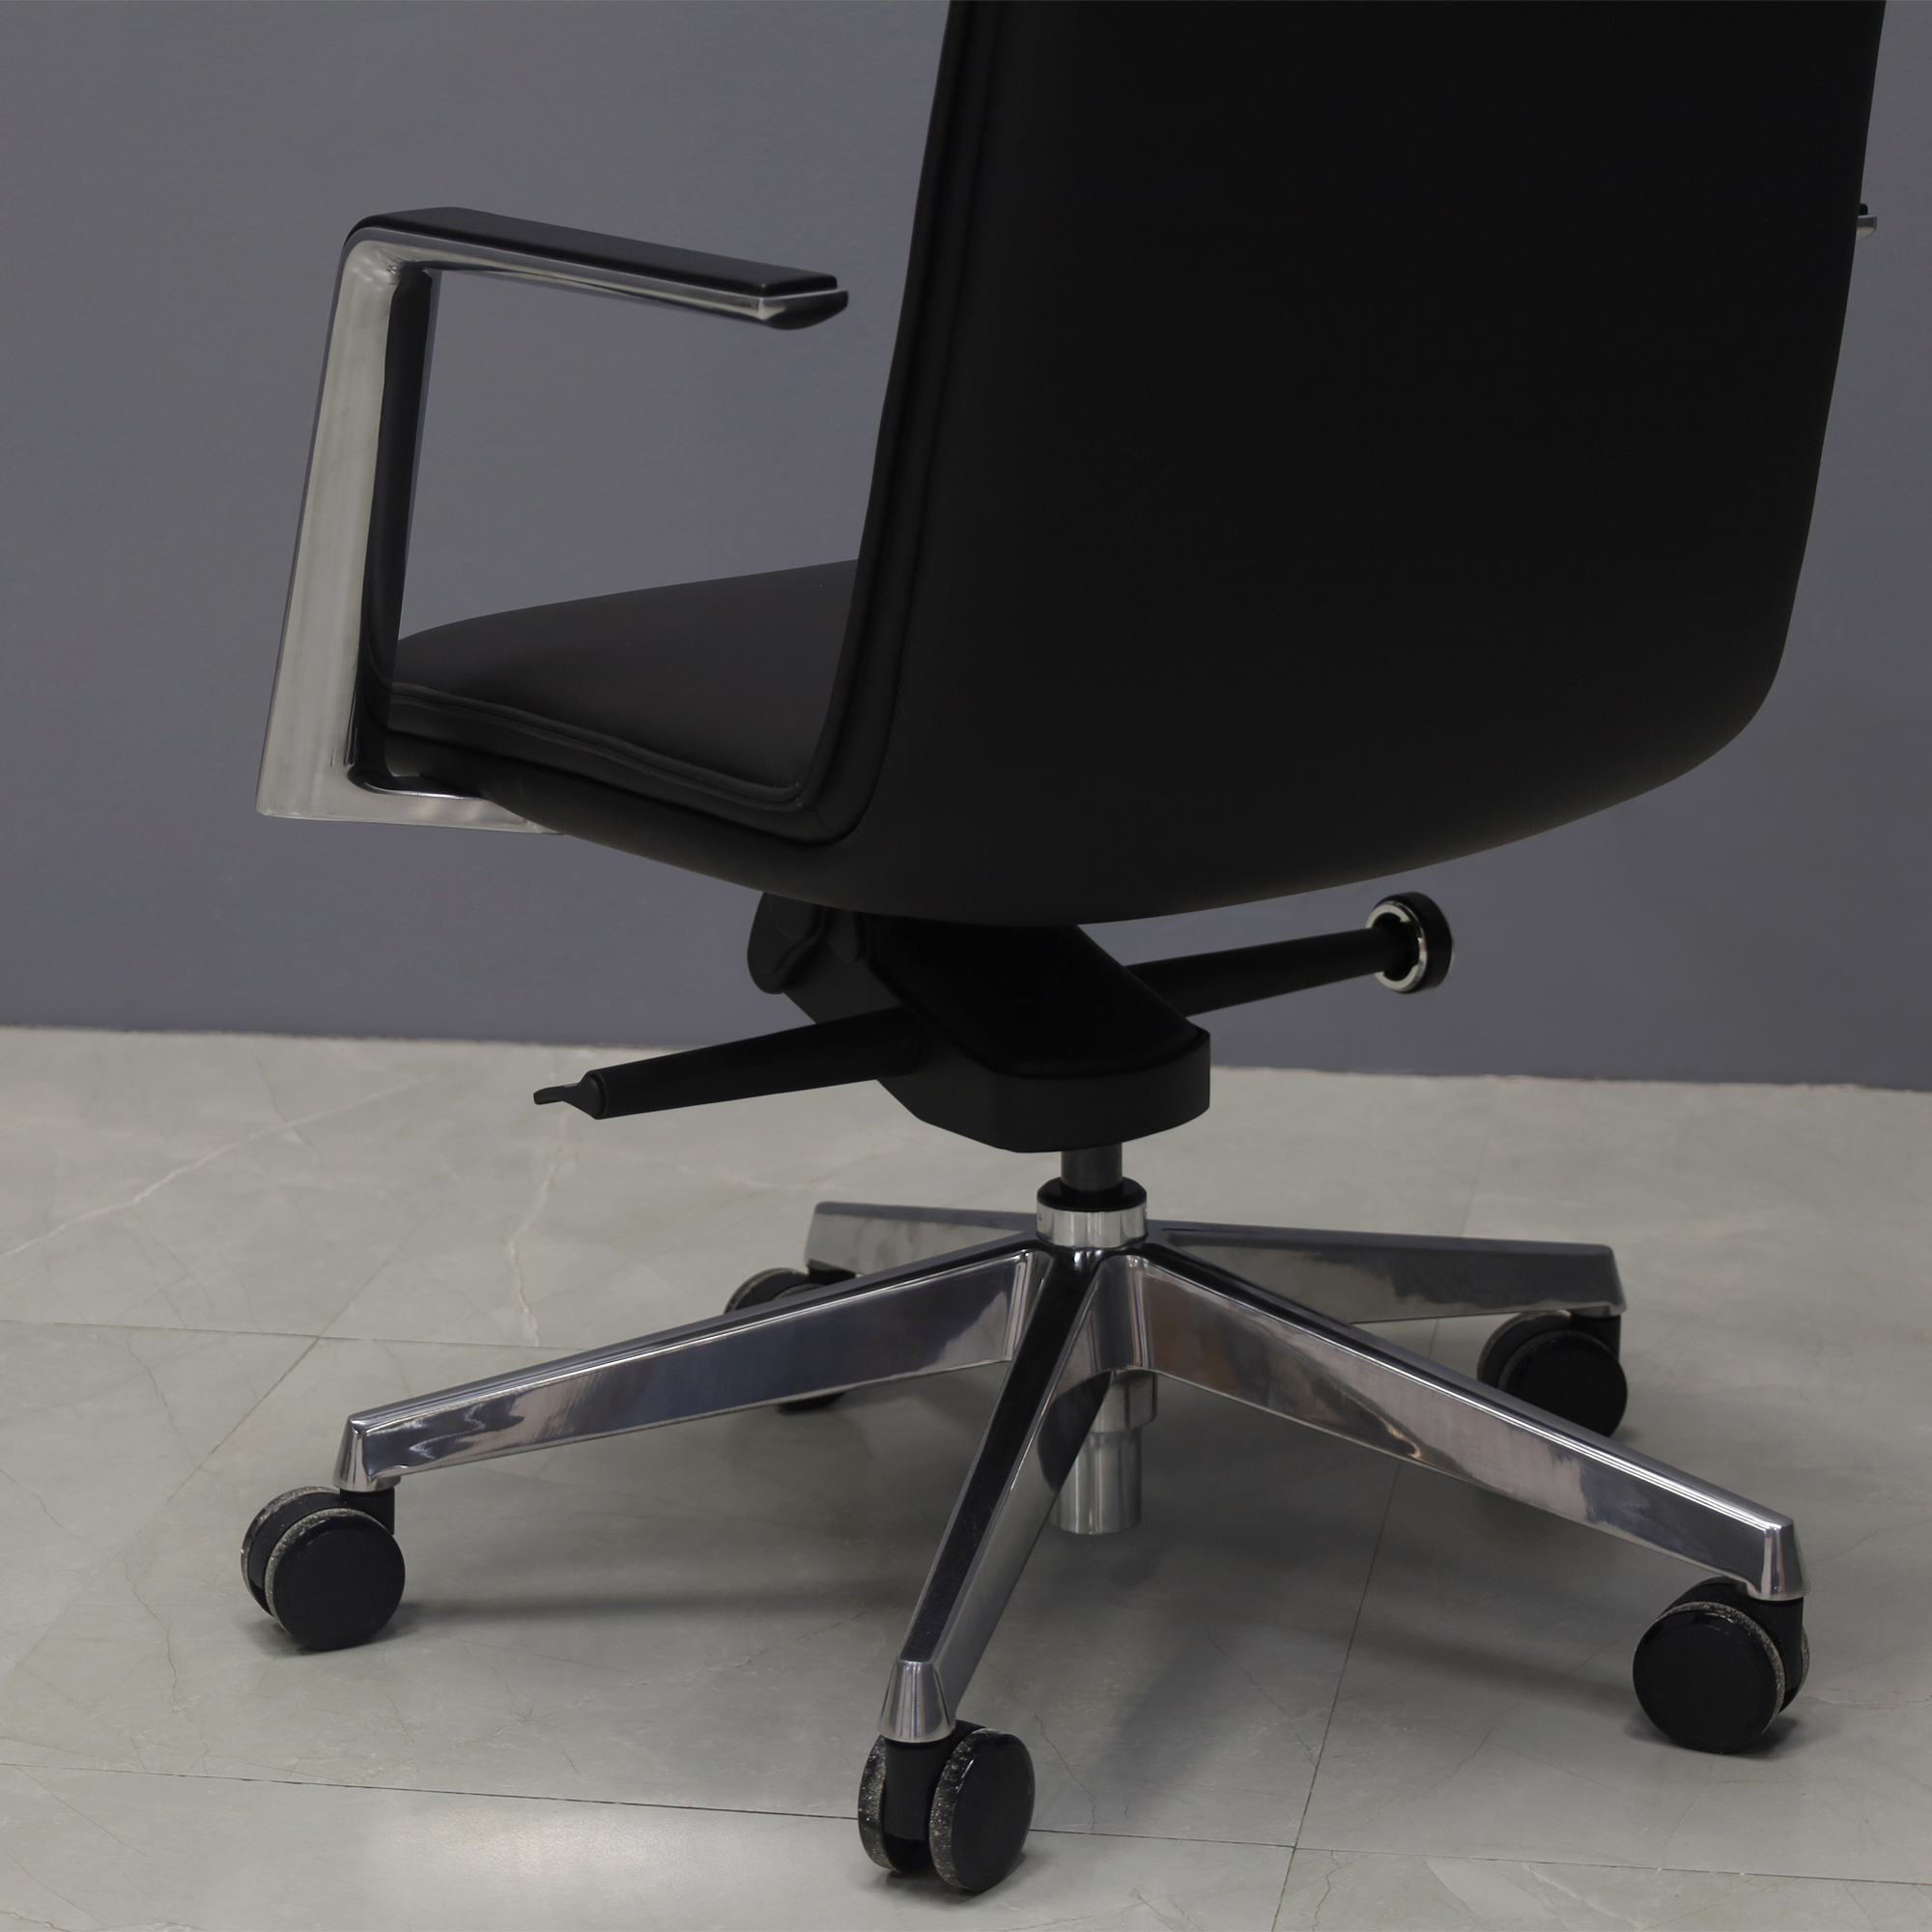 Della High Back Executive Chairs in black upholstery, shown here.